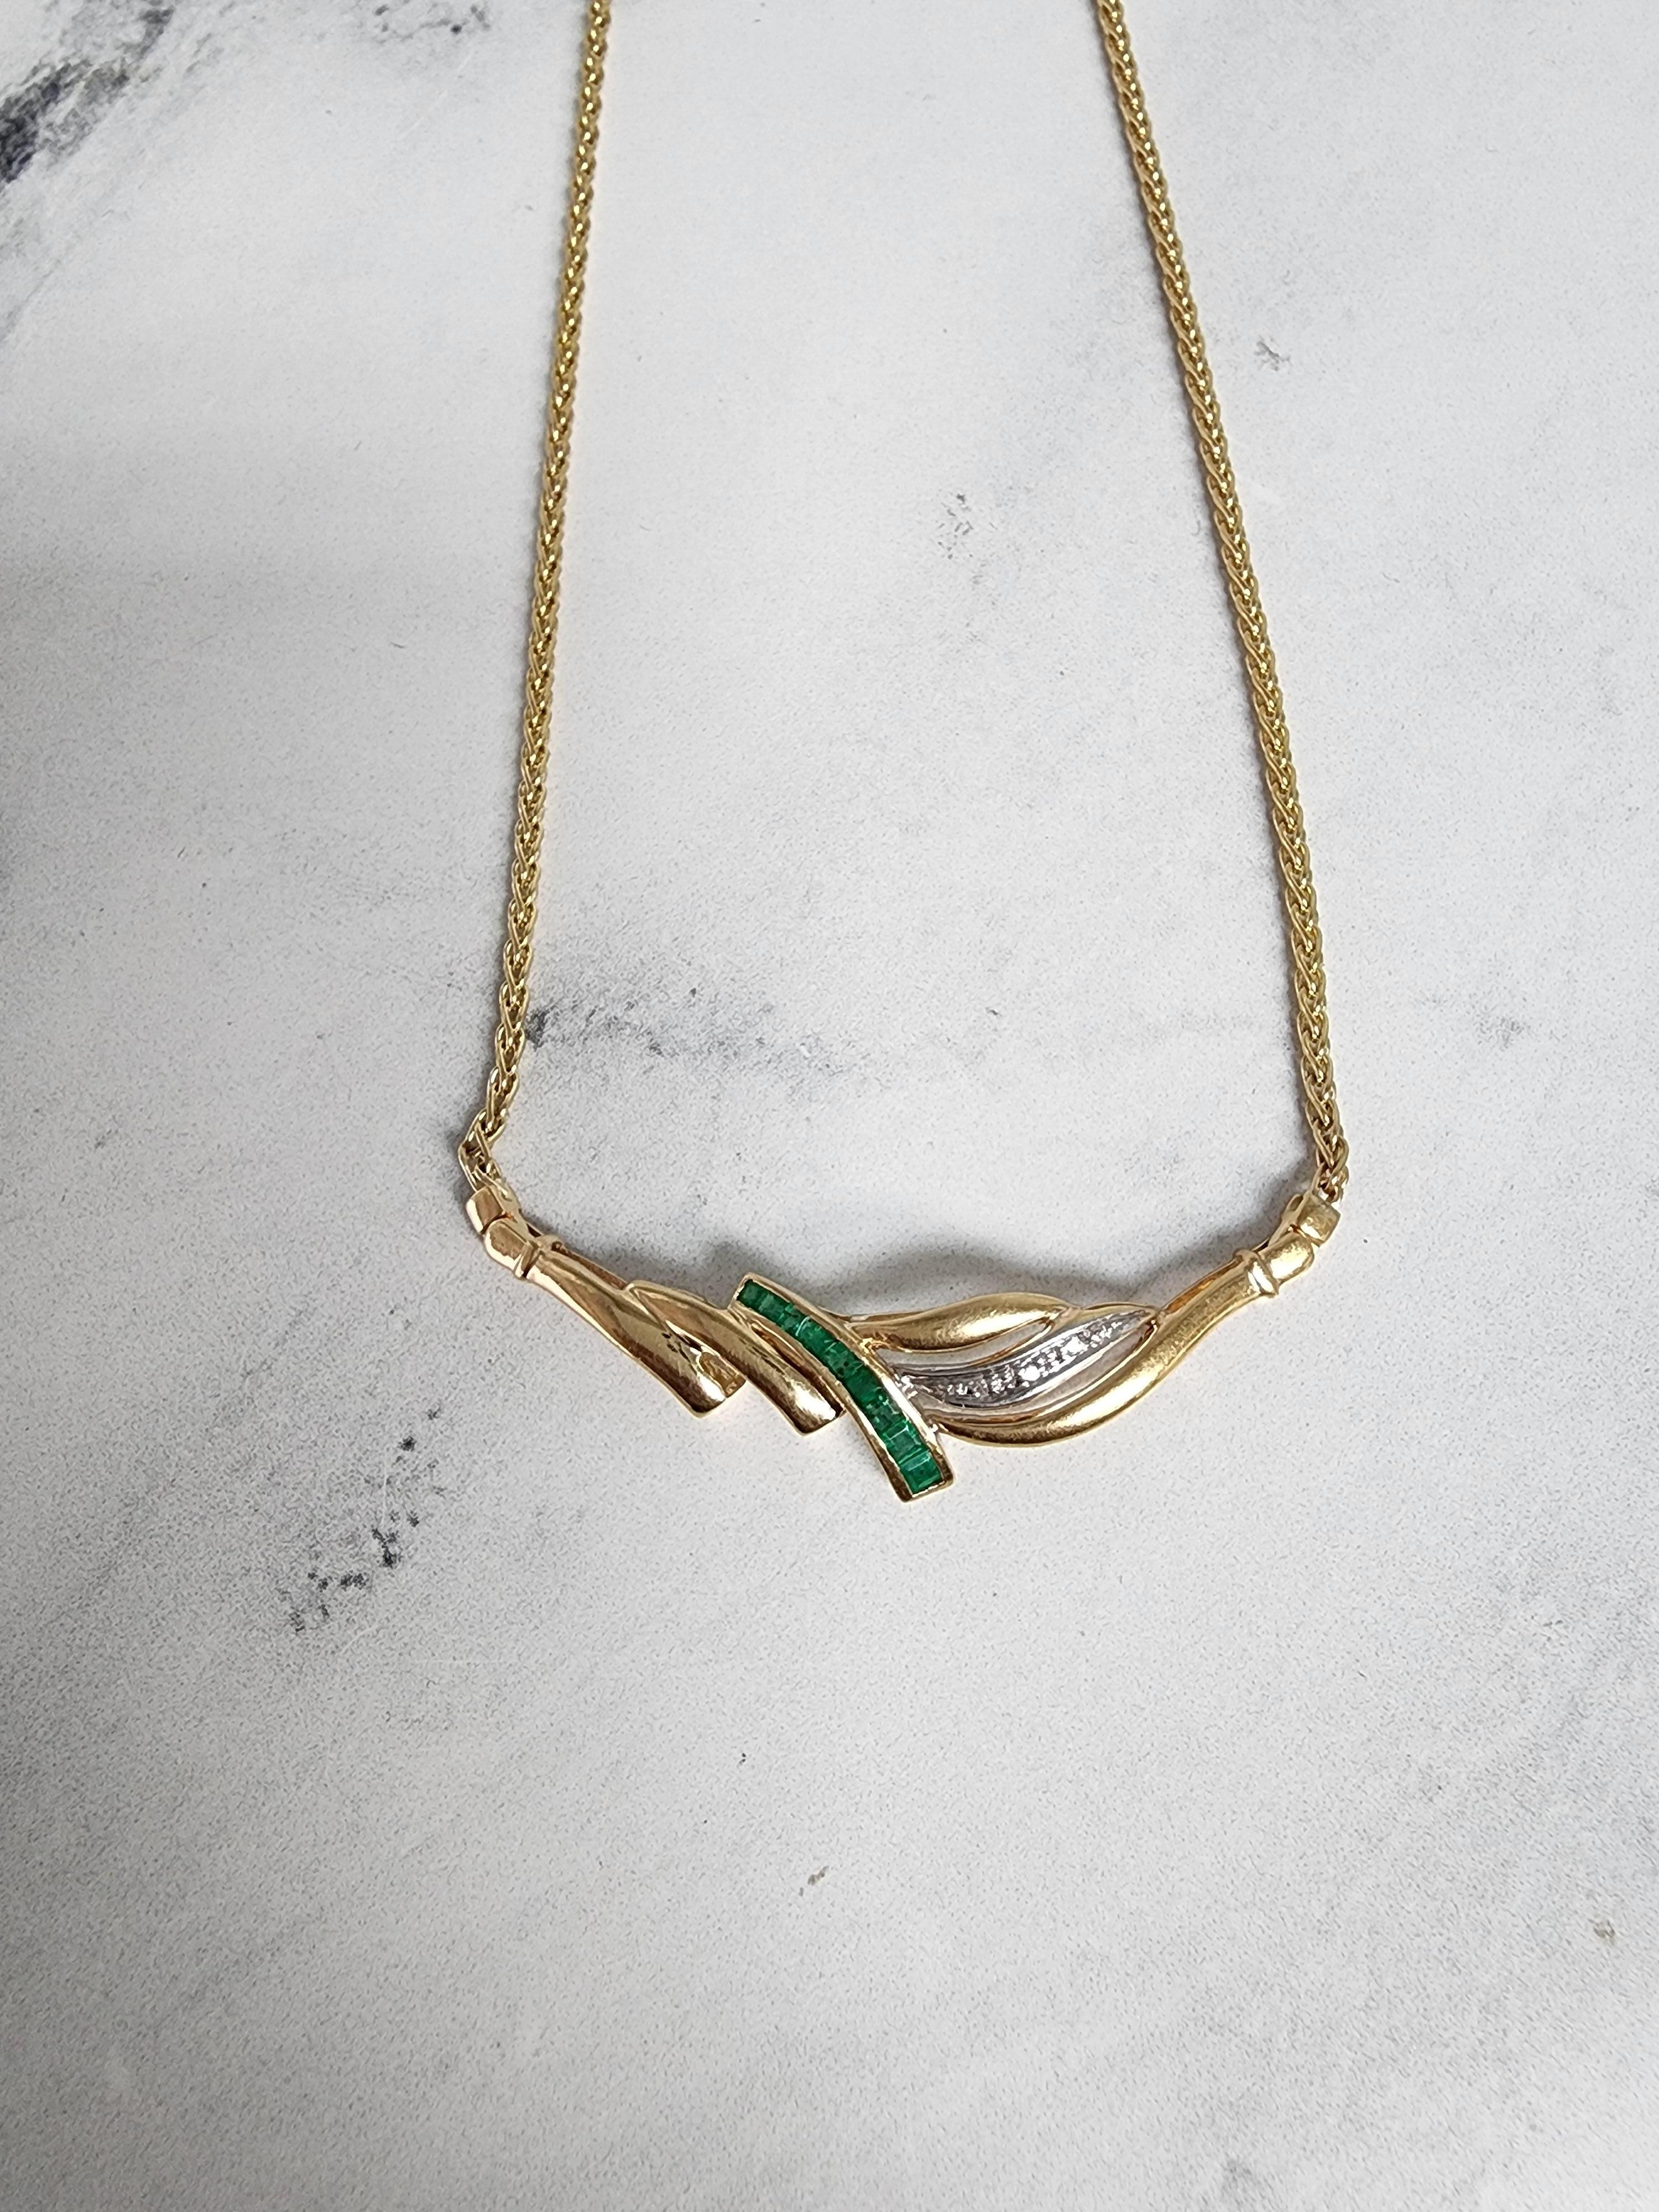 Half Carat Emerald & Diamond Necklace with Wheat Chain 14k Yellow Gold In New Condition For Sale In Sugar Land, TX